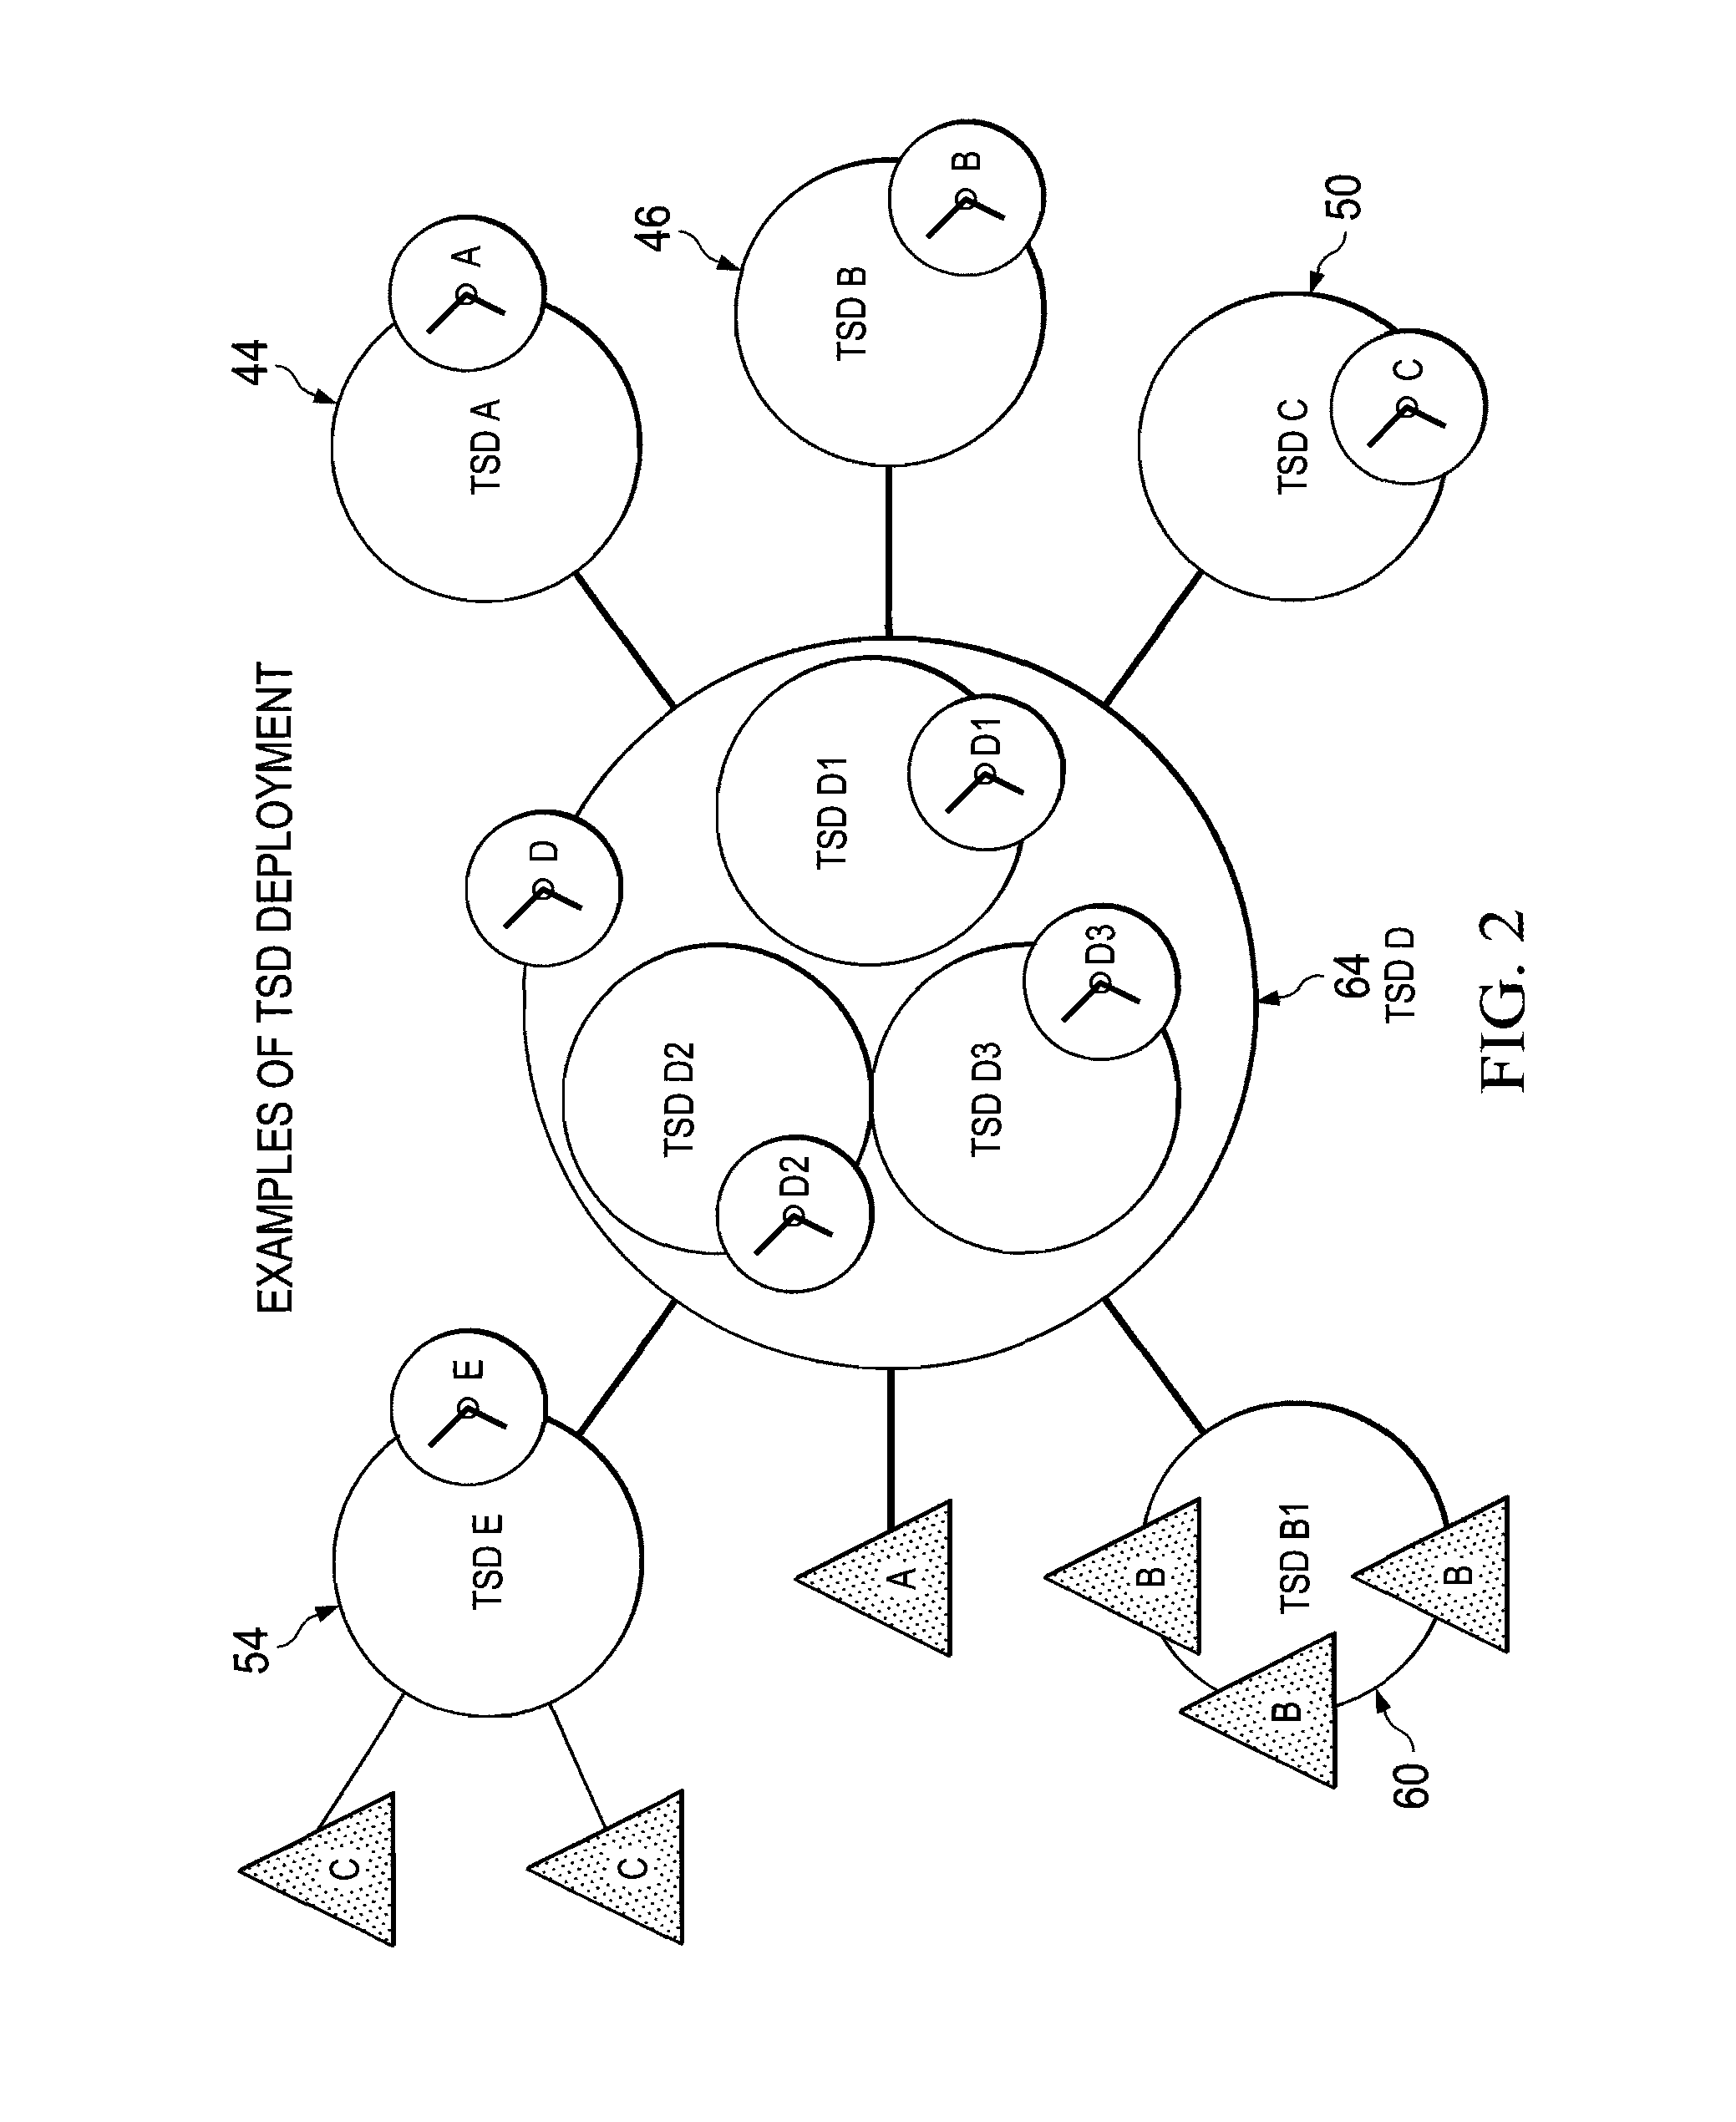 System and method for providing quality inter-domain network time transport